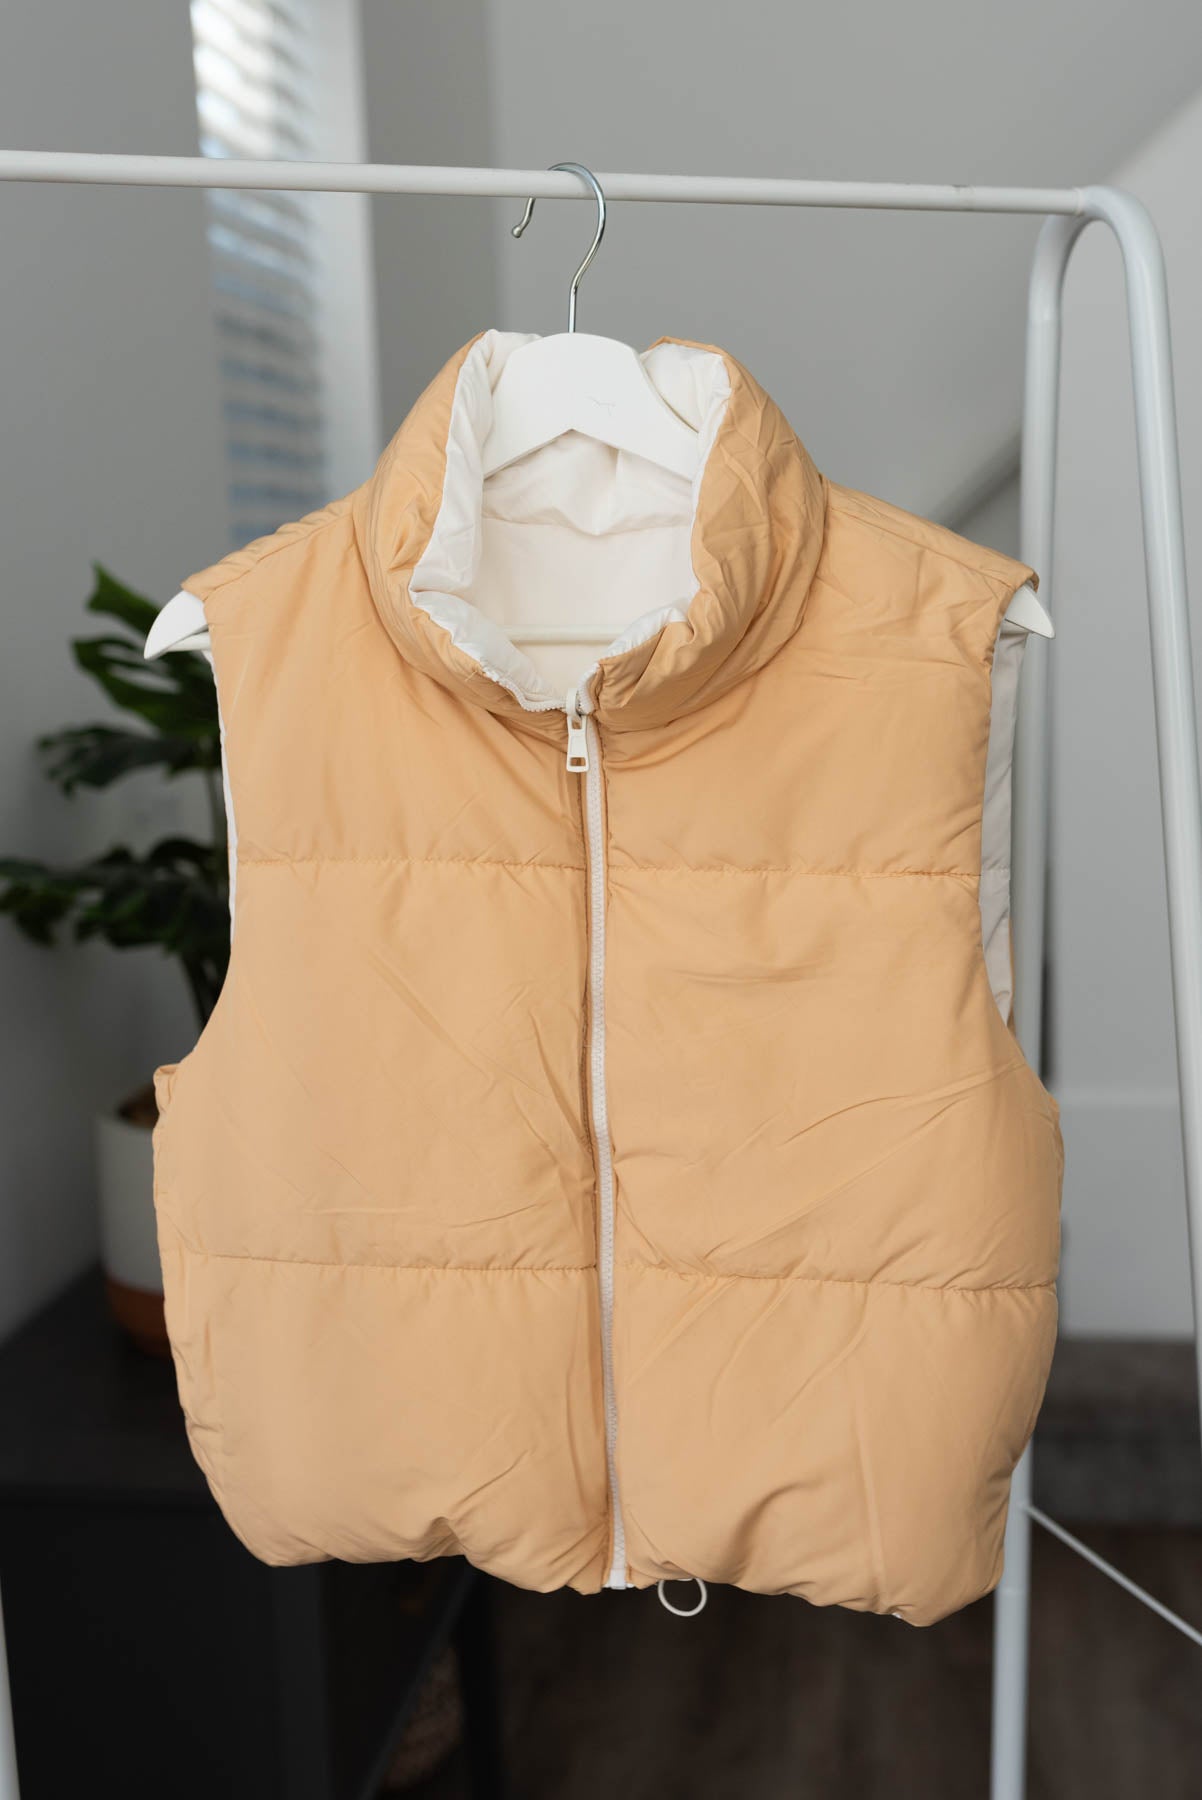 Tan side of the ivory reversible puff vest